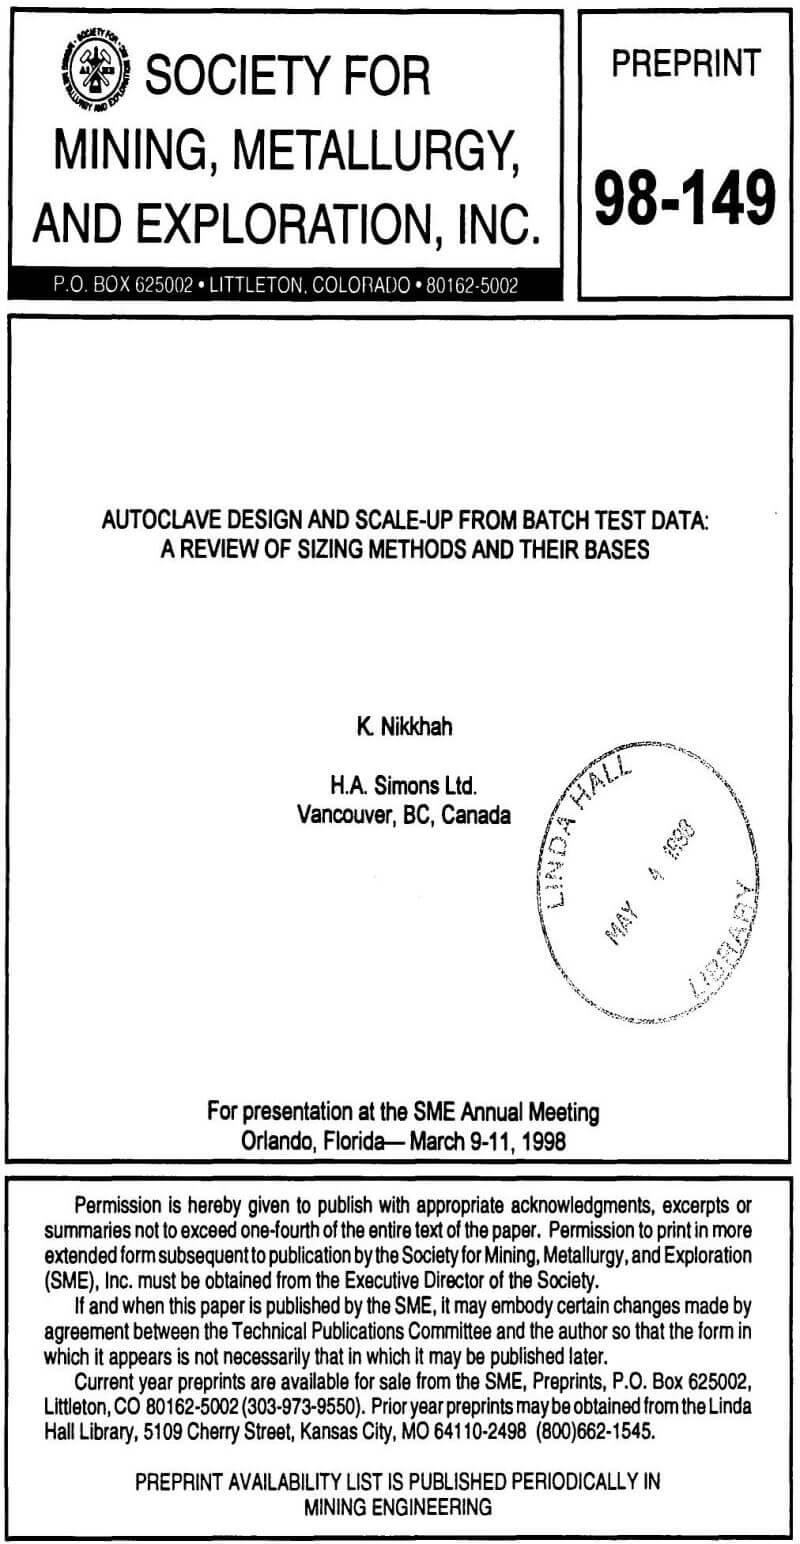 autoclave design and scale-up from batch test data a review of sizing methods and their bases